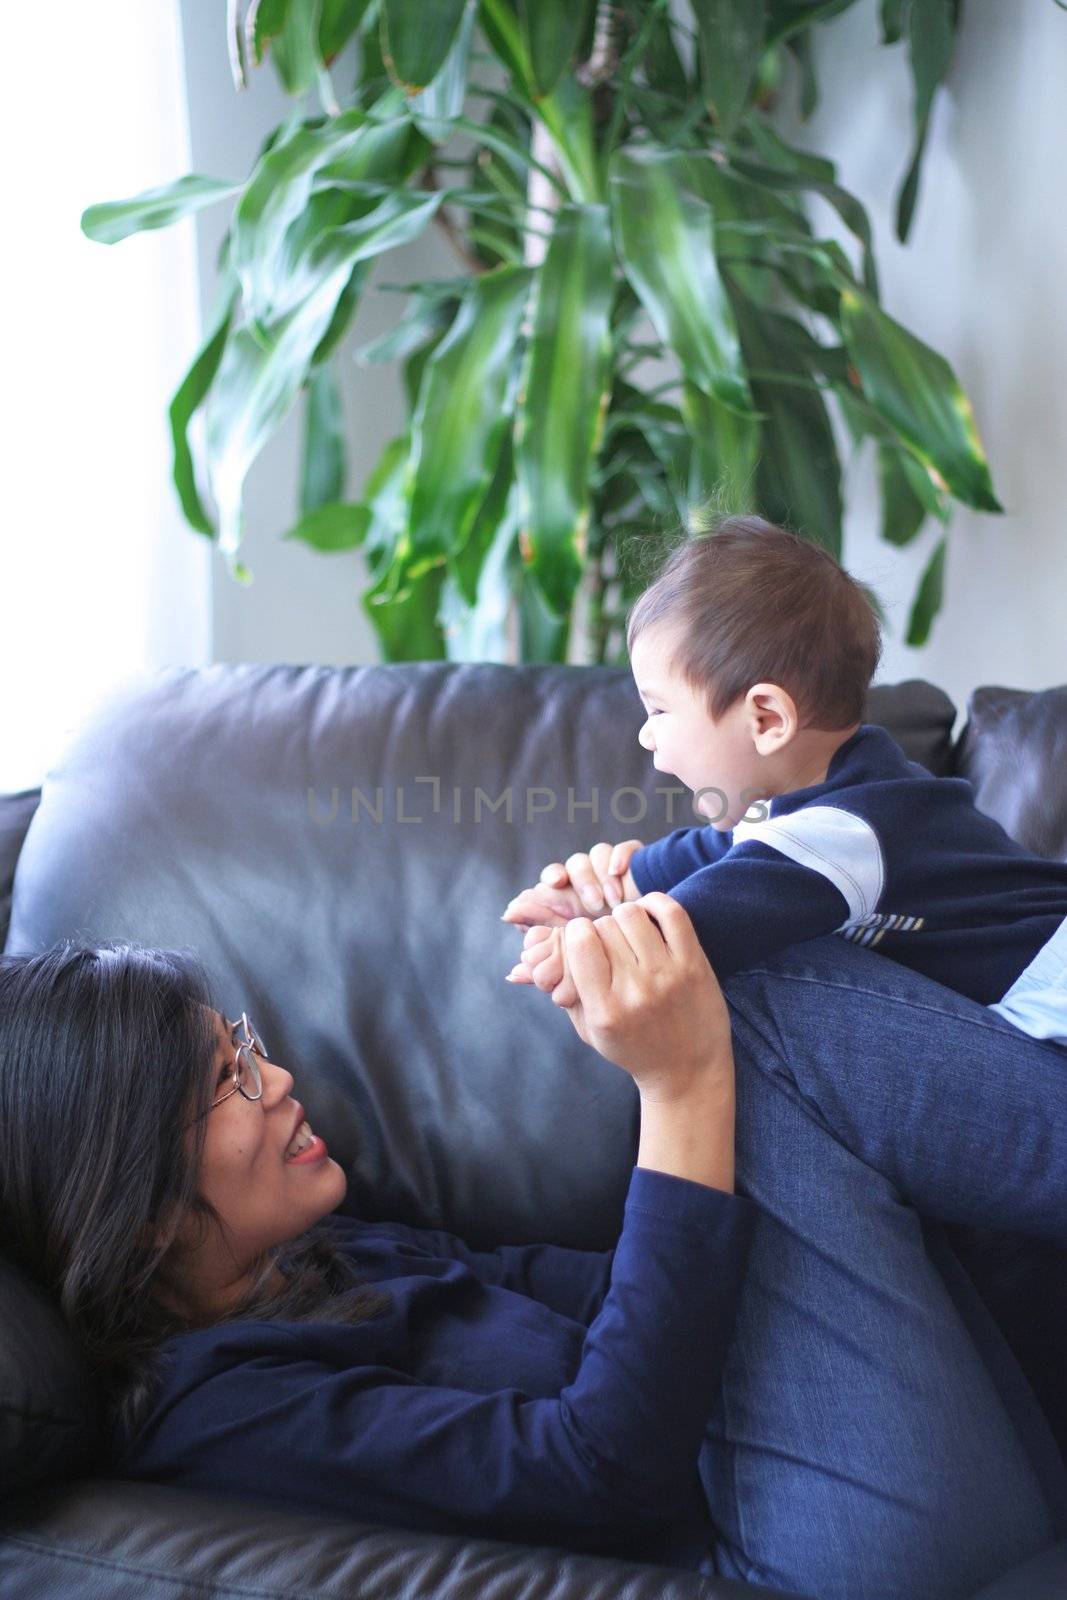 Mother playing with her baby boy on couch